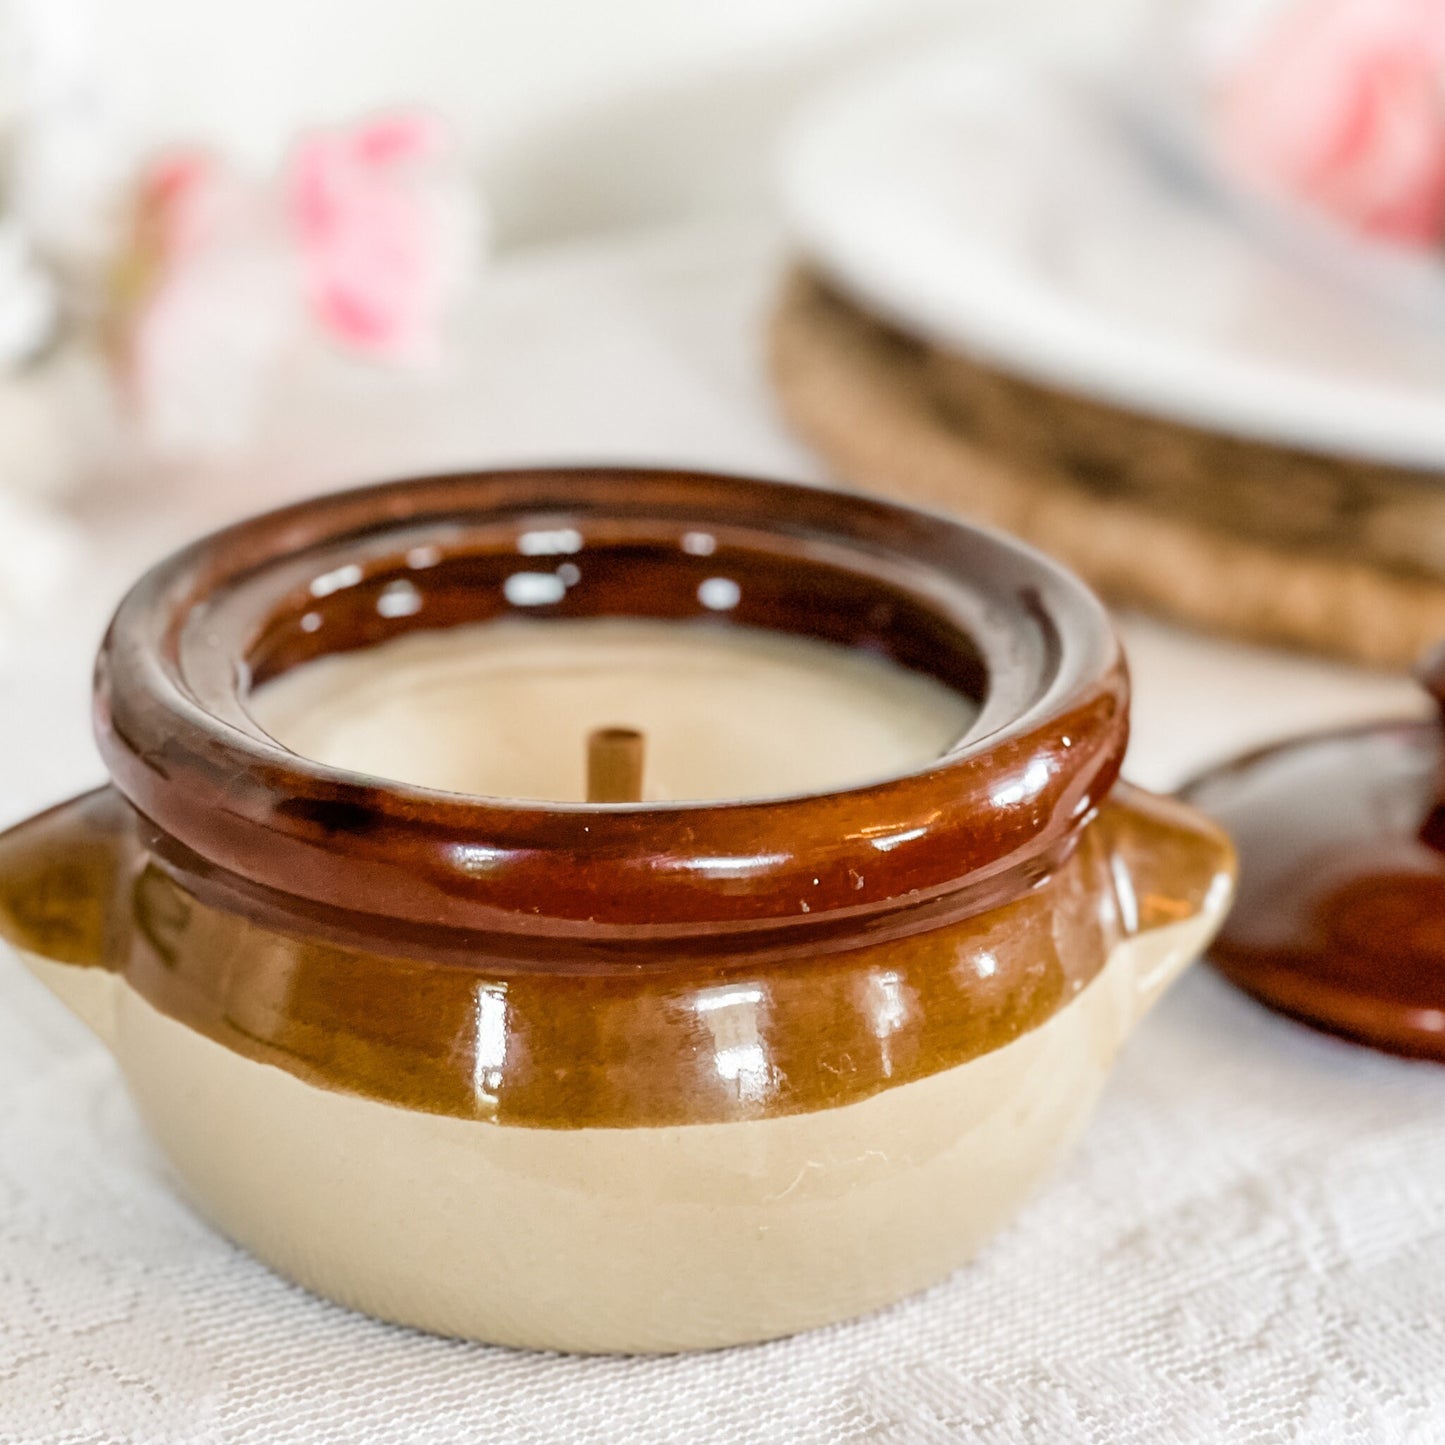 Scented Candles, Vintage Pottery Bowls, Coworker Gift, Farmhouse Decor